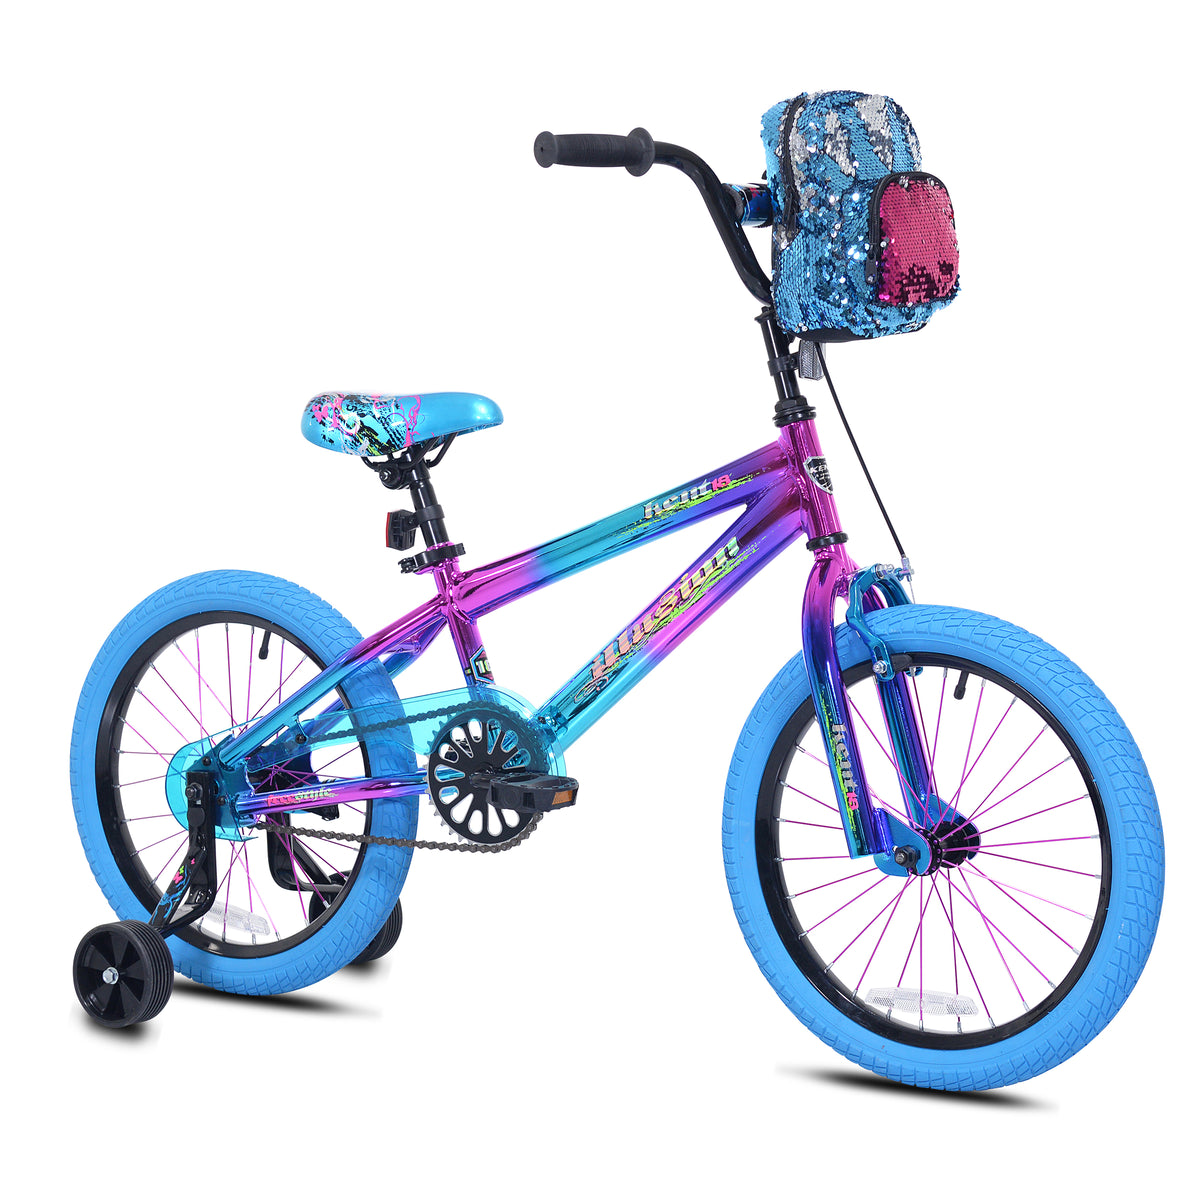 18" Kent Illusion | Bike for Kids Ages 5-8